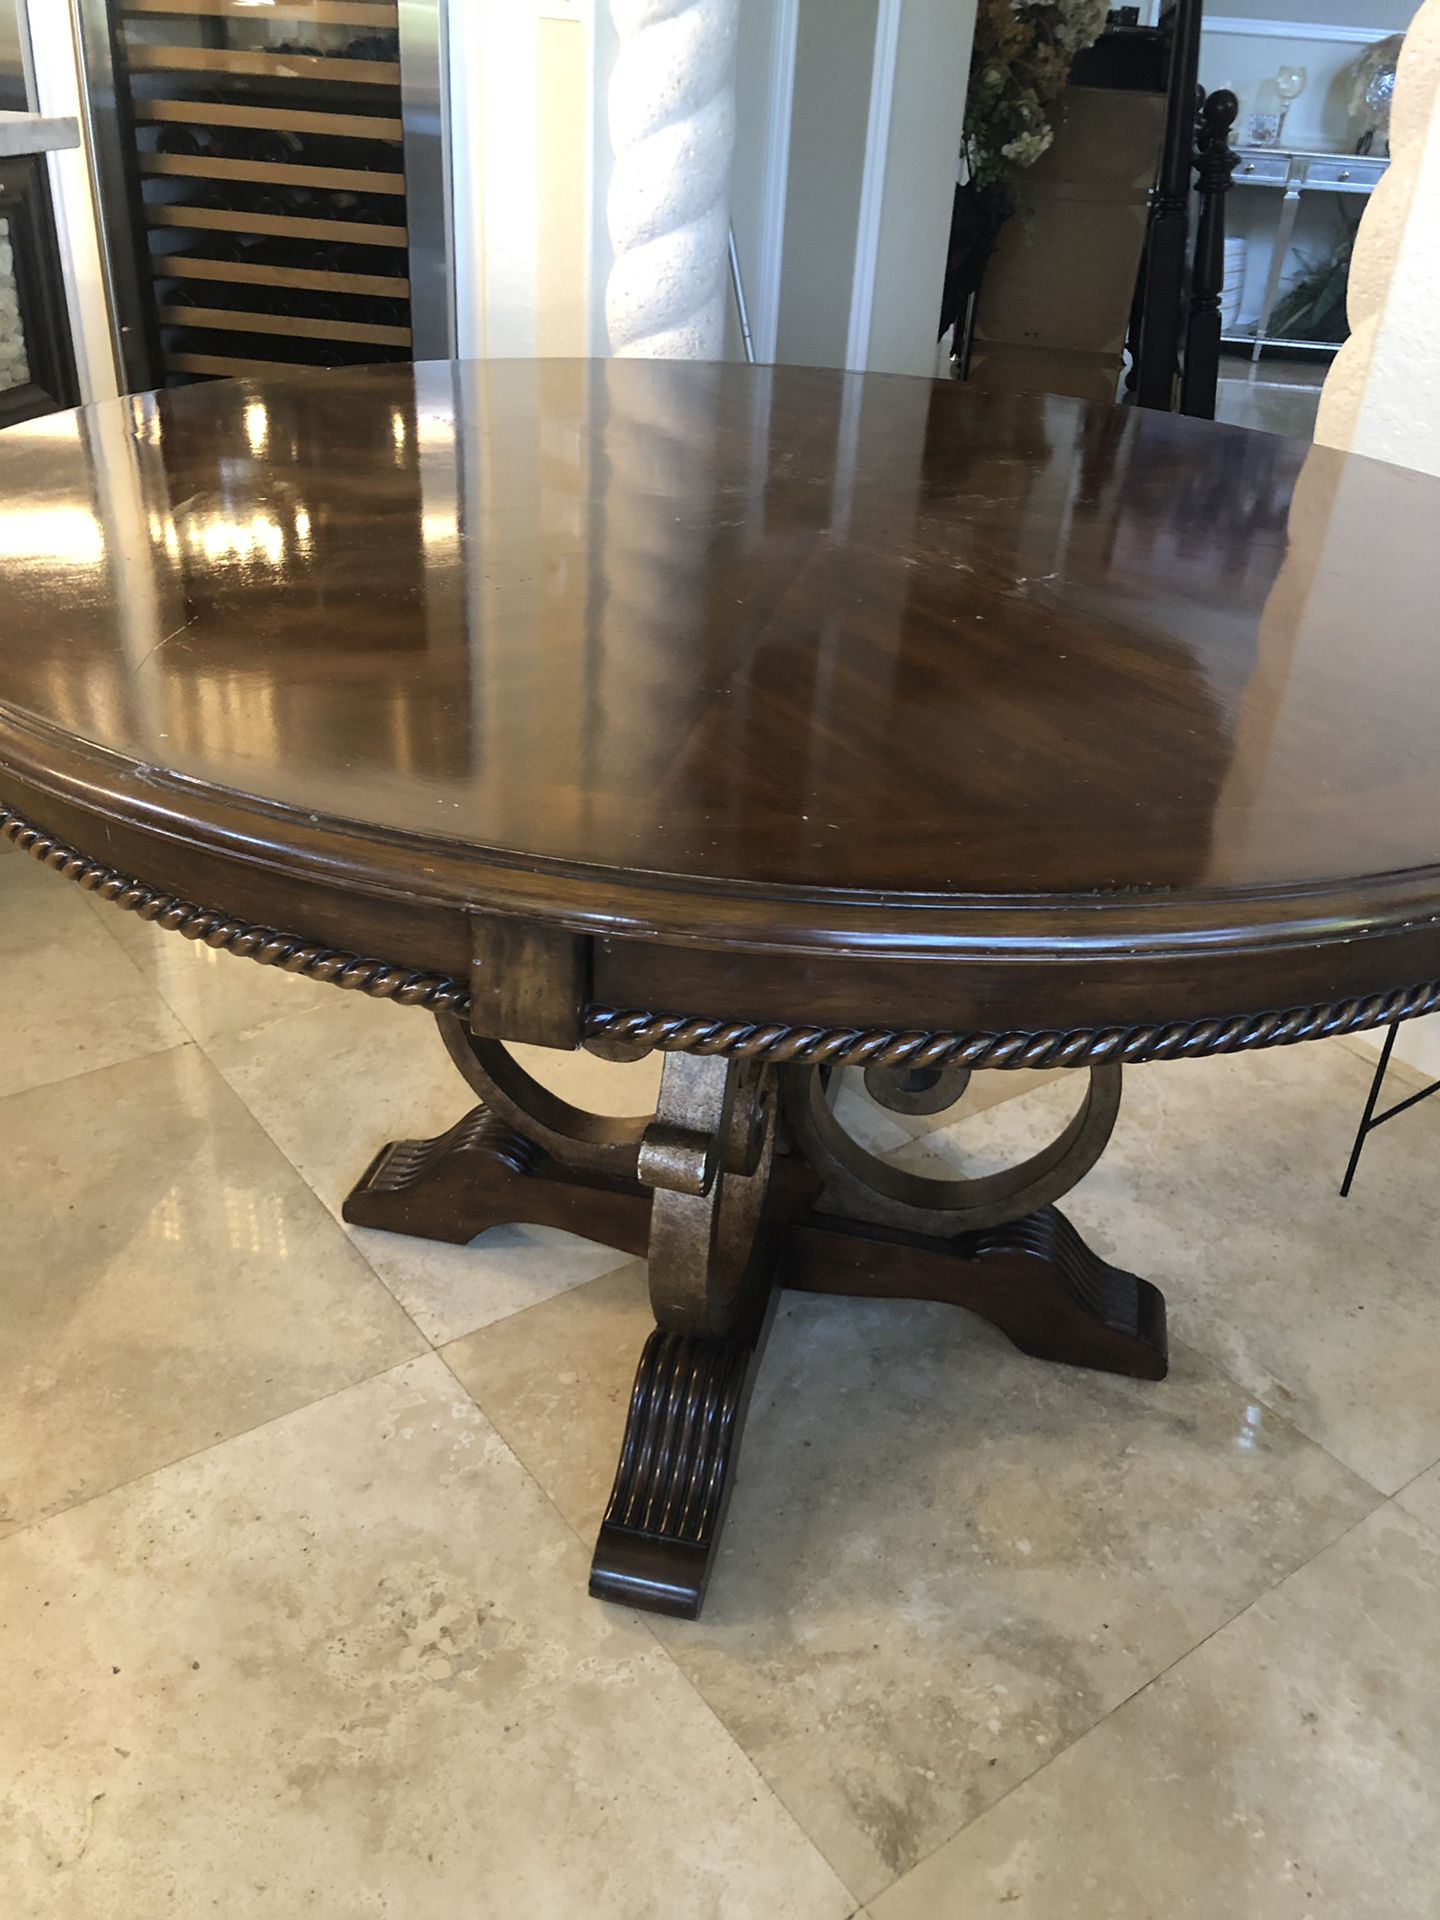 Solid wood breakfast table with brass accent and solid base. 55 diameter 30 high.